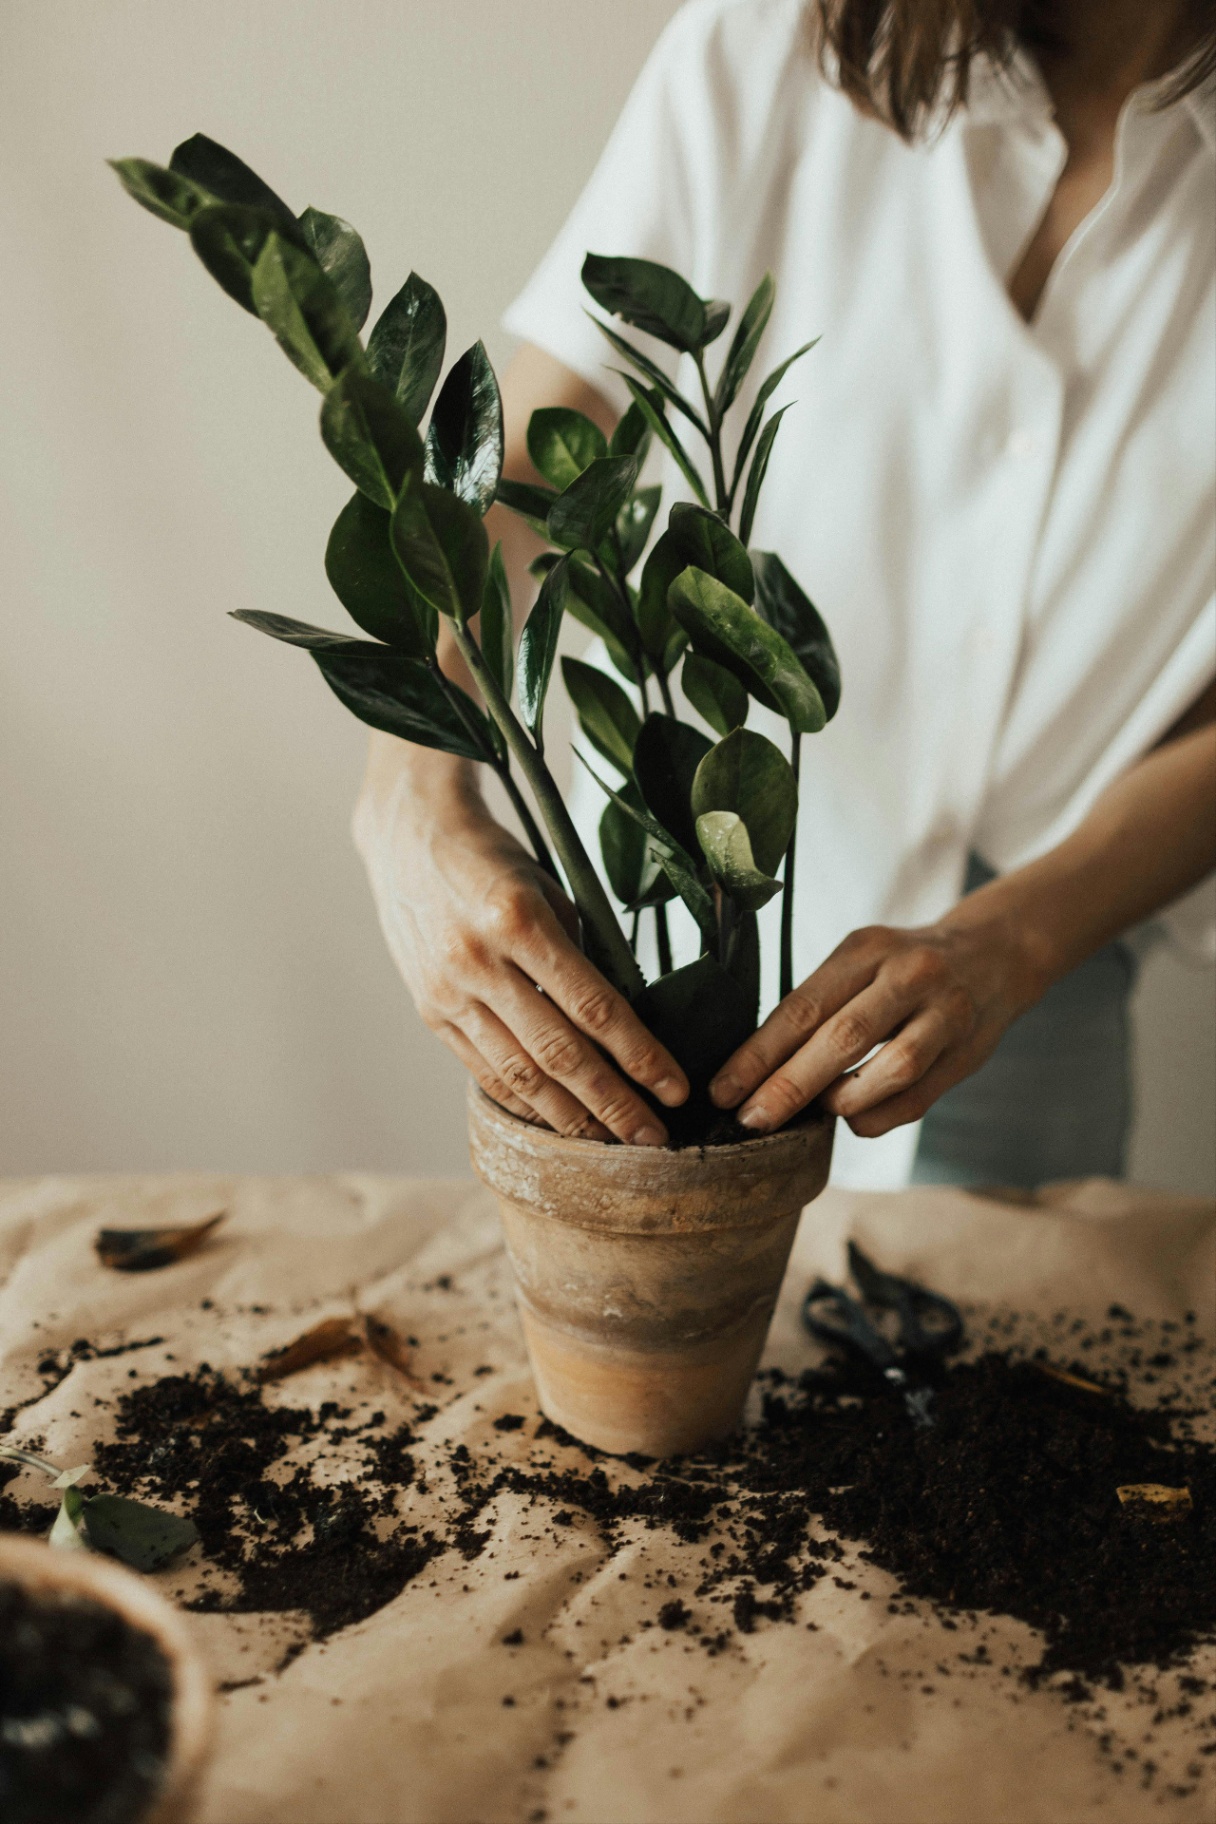 A close up of a person repotting a plant. Tending to plants can be a great way to cultivate mindfulness with the help of a therapist in Delray Beach, FL. Search for EMDR therapy in Palm Beach, FL or online therapy in Florida to learn more about the support Palm Beach County, FL therapy can offer.